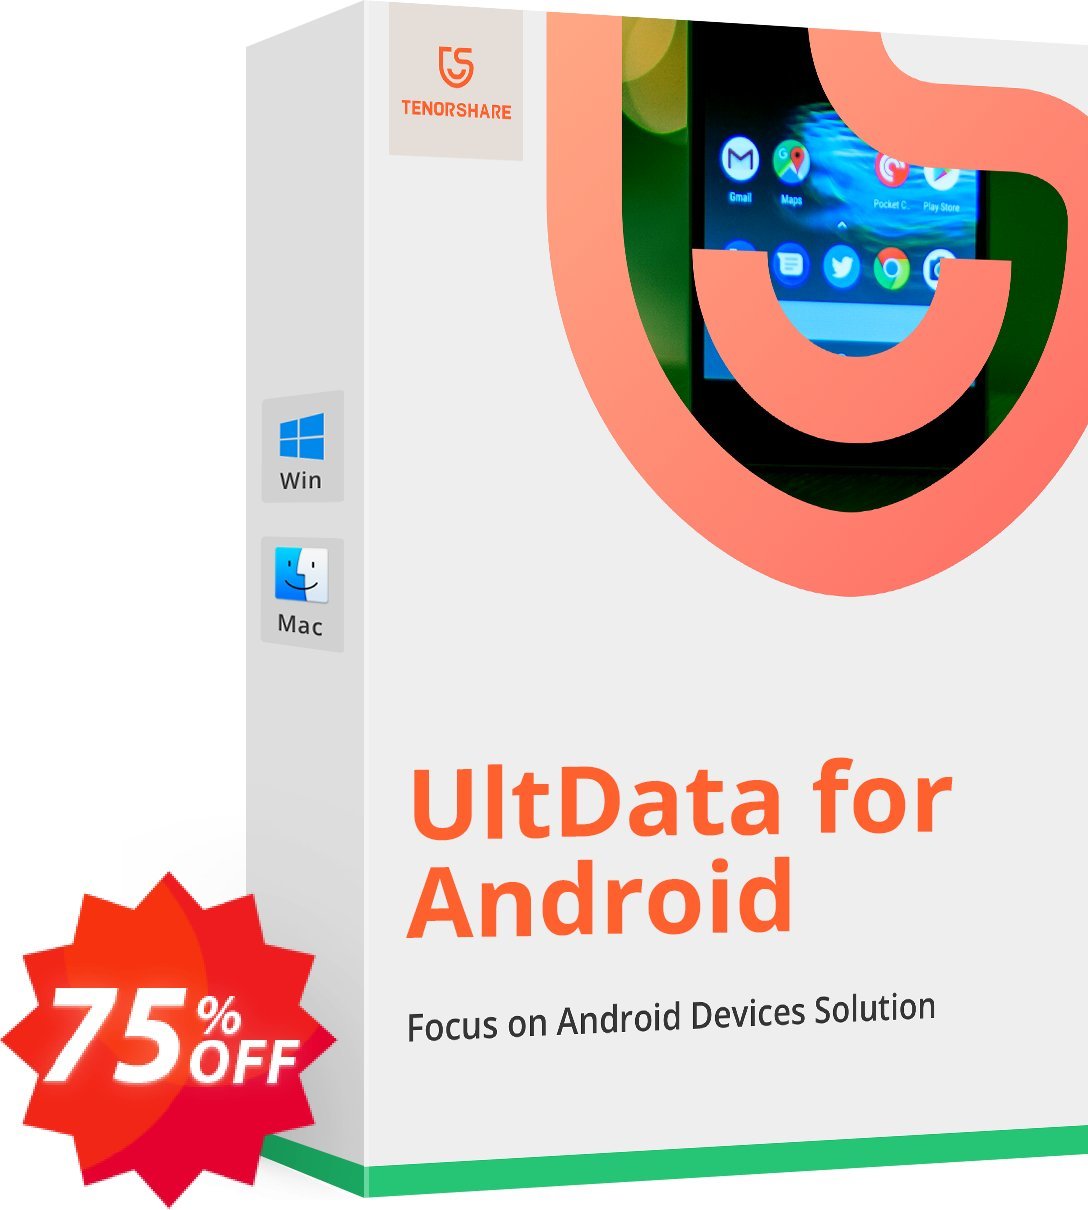 Tenorshare UltData for Android, Lifetime Plan  Coupon code 75% discount 